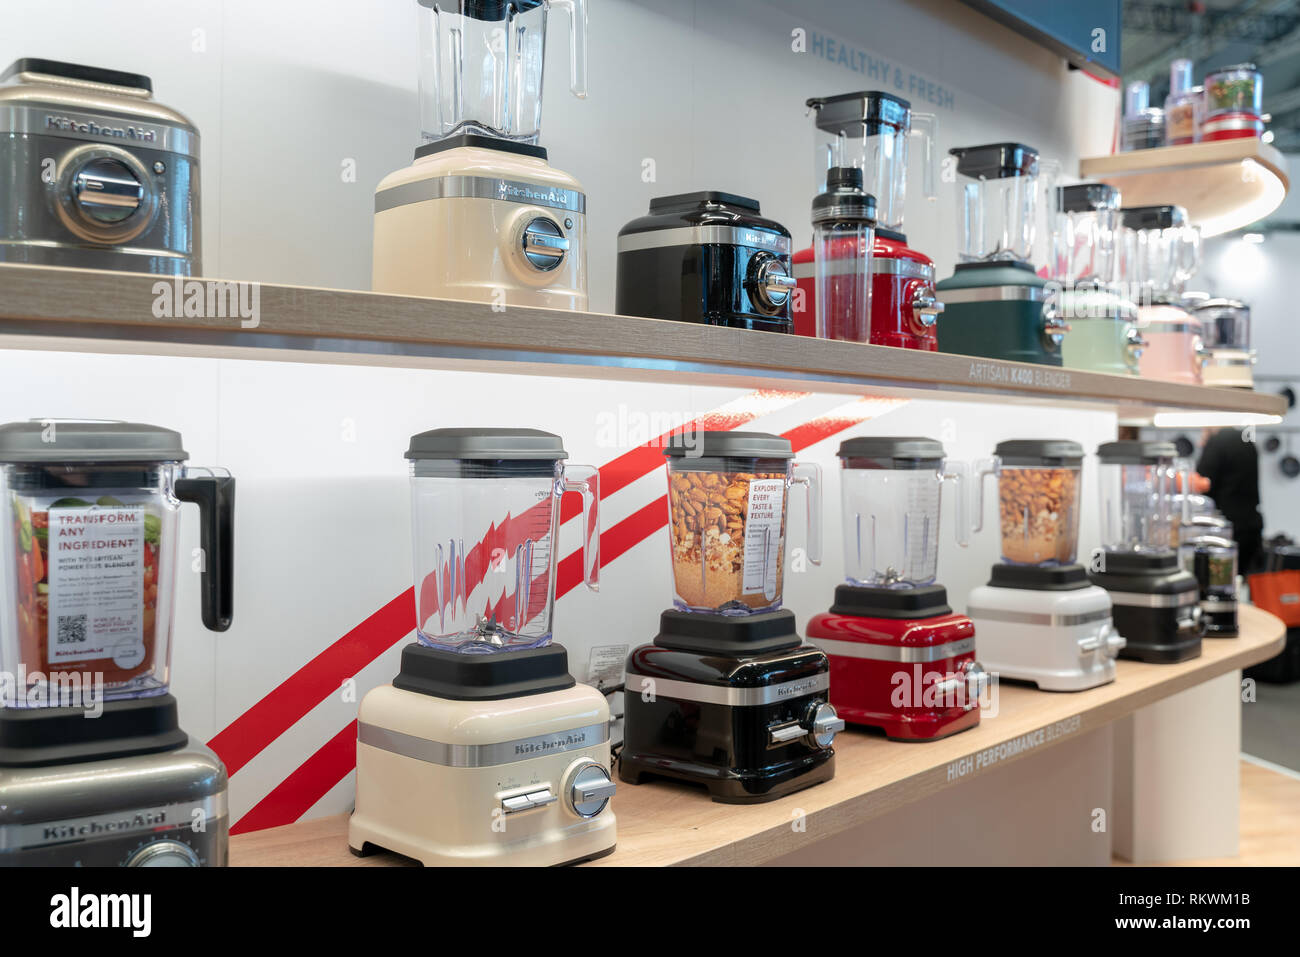 https://c8.alamy.com/comp/RKWM1B/frankfurt-germany-11th-feb-2019-impressions-from-the-ambiente-trade-fair-2019-kitchen-aid-blenders-ambiente-is-a-leading-consumer-goods-trade-fair-with-more-than-4300-exhibitors-and-130000-trade-visitors-credit-markus-wissmannalamy-live-news-RKWM1B.jpg